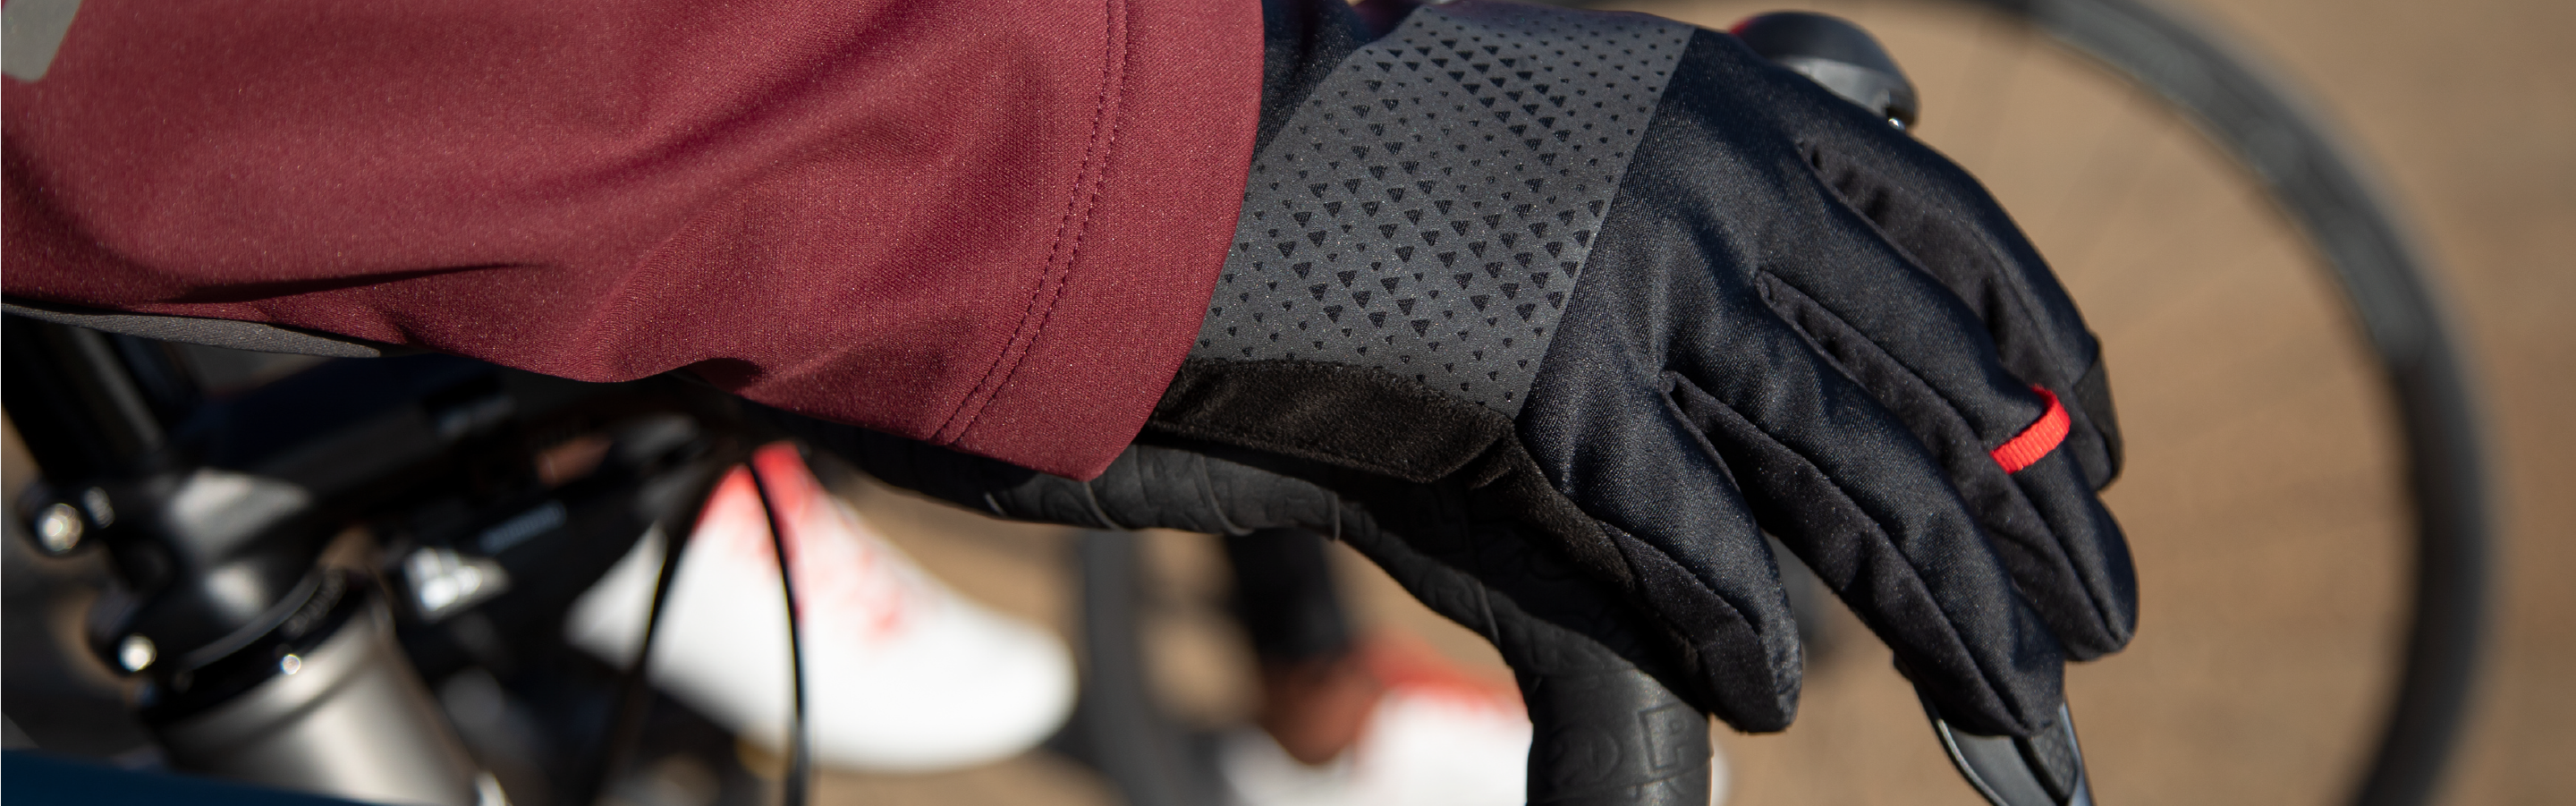 Premium Men's Cycling Gloves for All Seasons